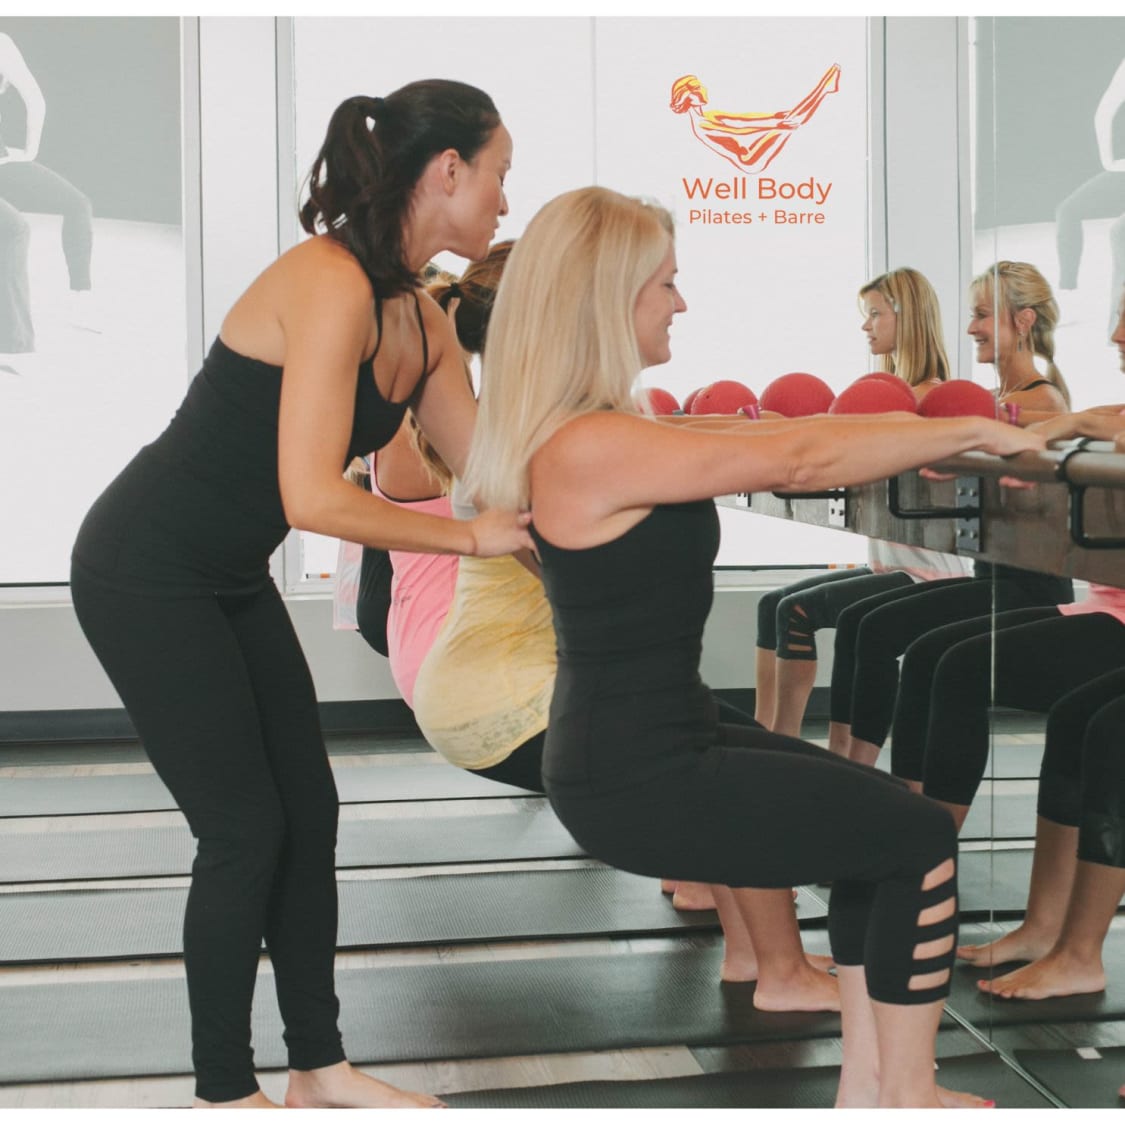 Well Body Pilates - West: Read Reviews and Book Classes on ClassPass